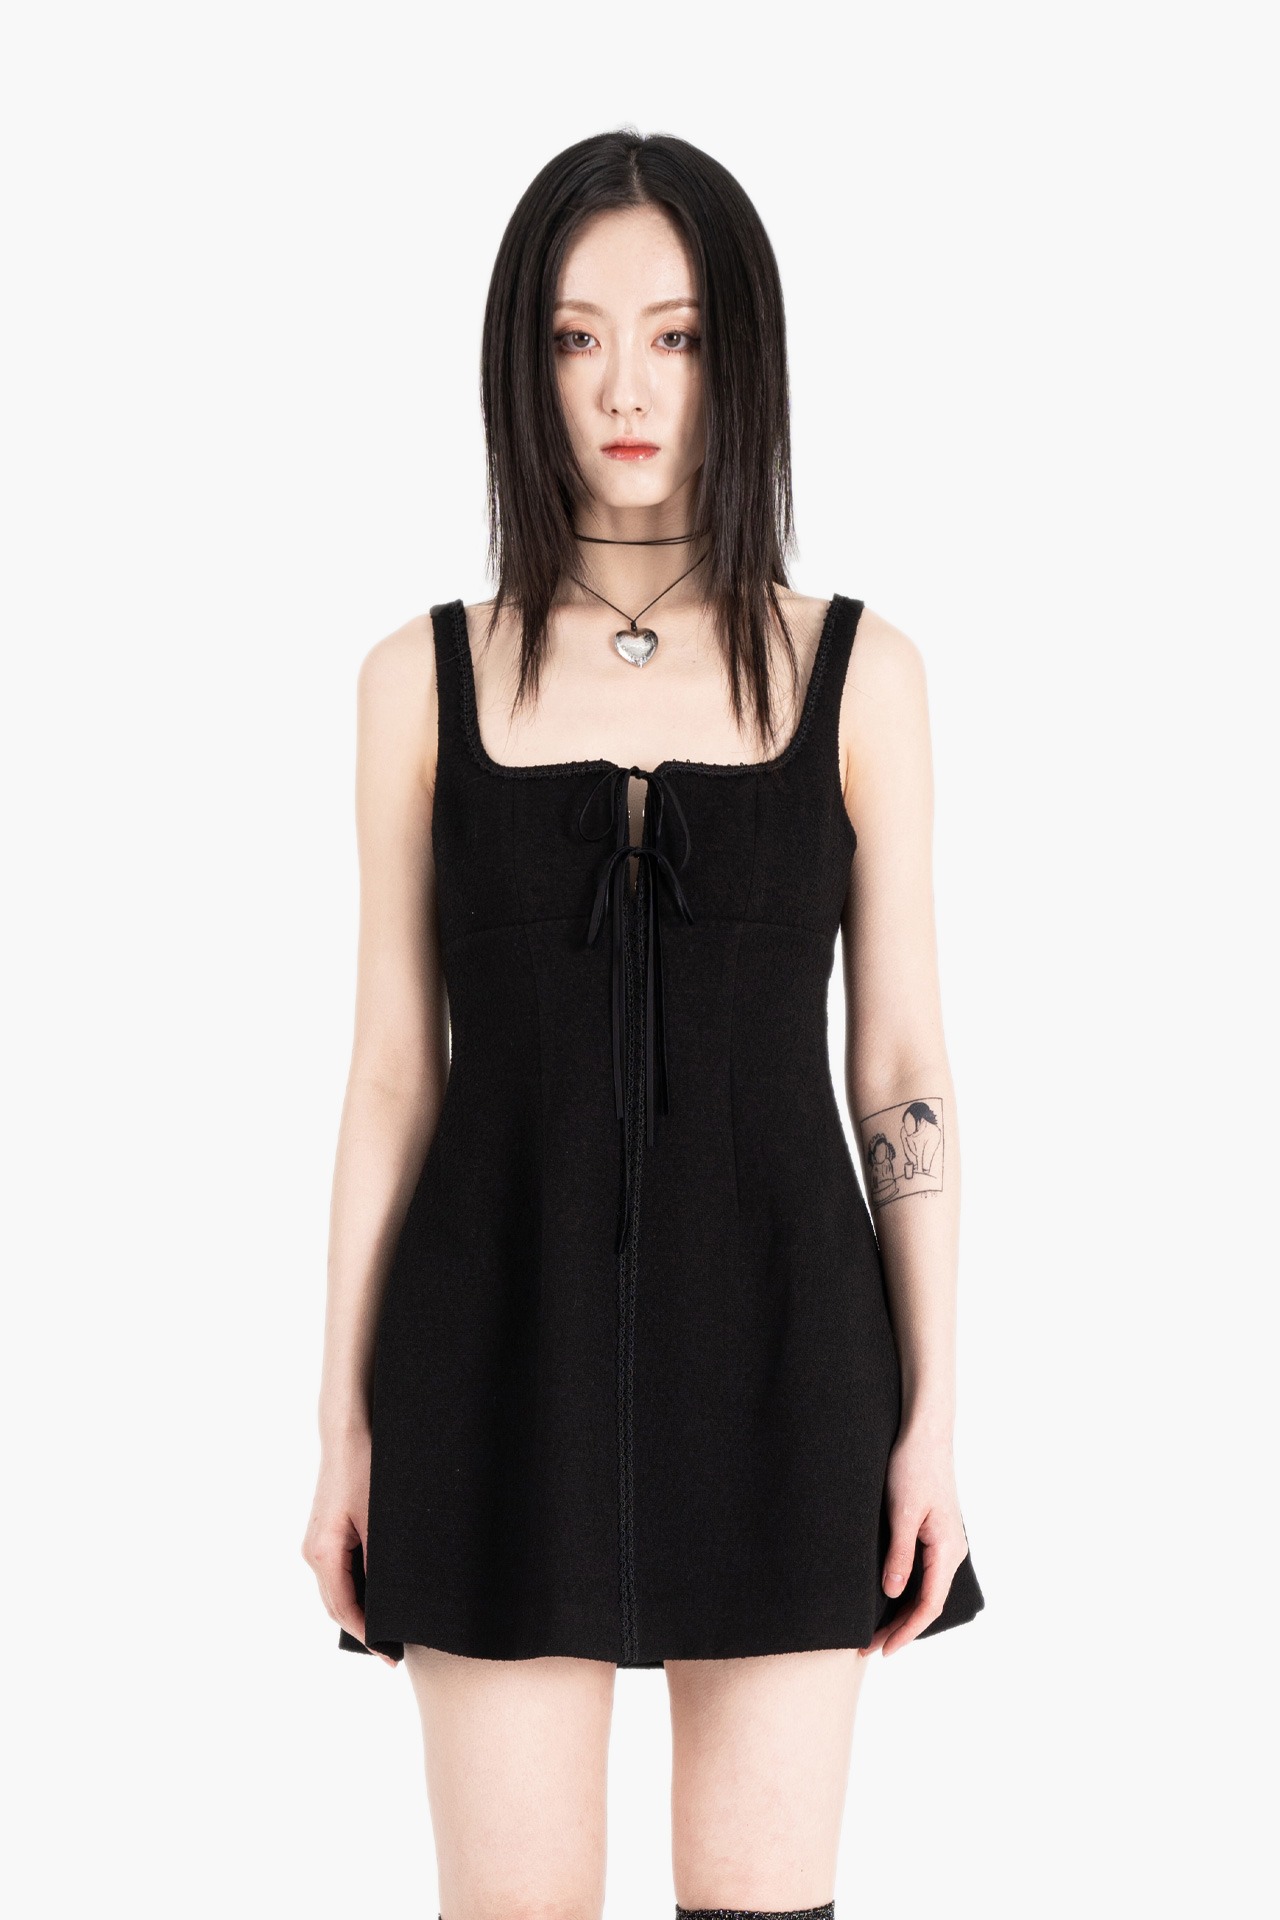 [IVE ウォニョン&#039;s Pick] BLACK LACE CUT OUT DRESS [5rd pre-order]